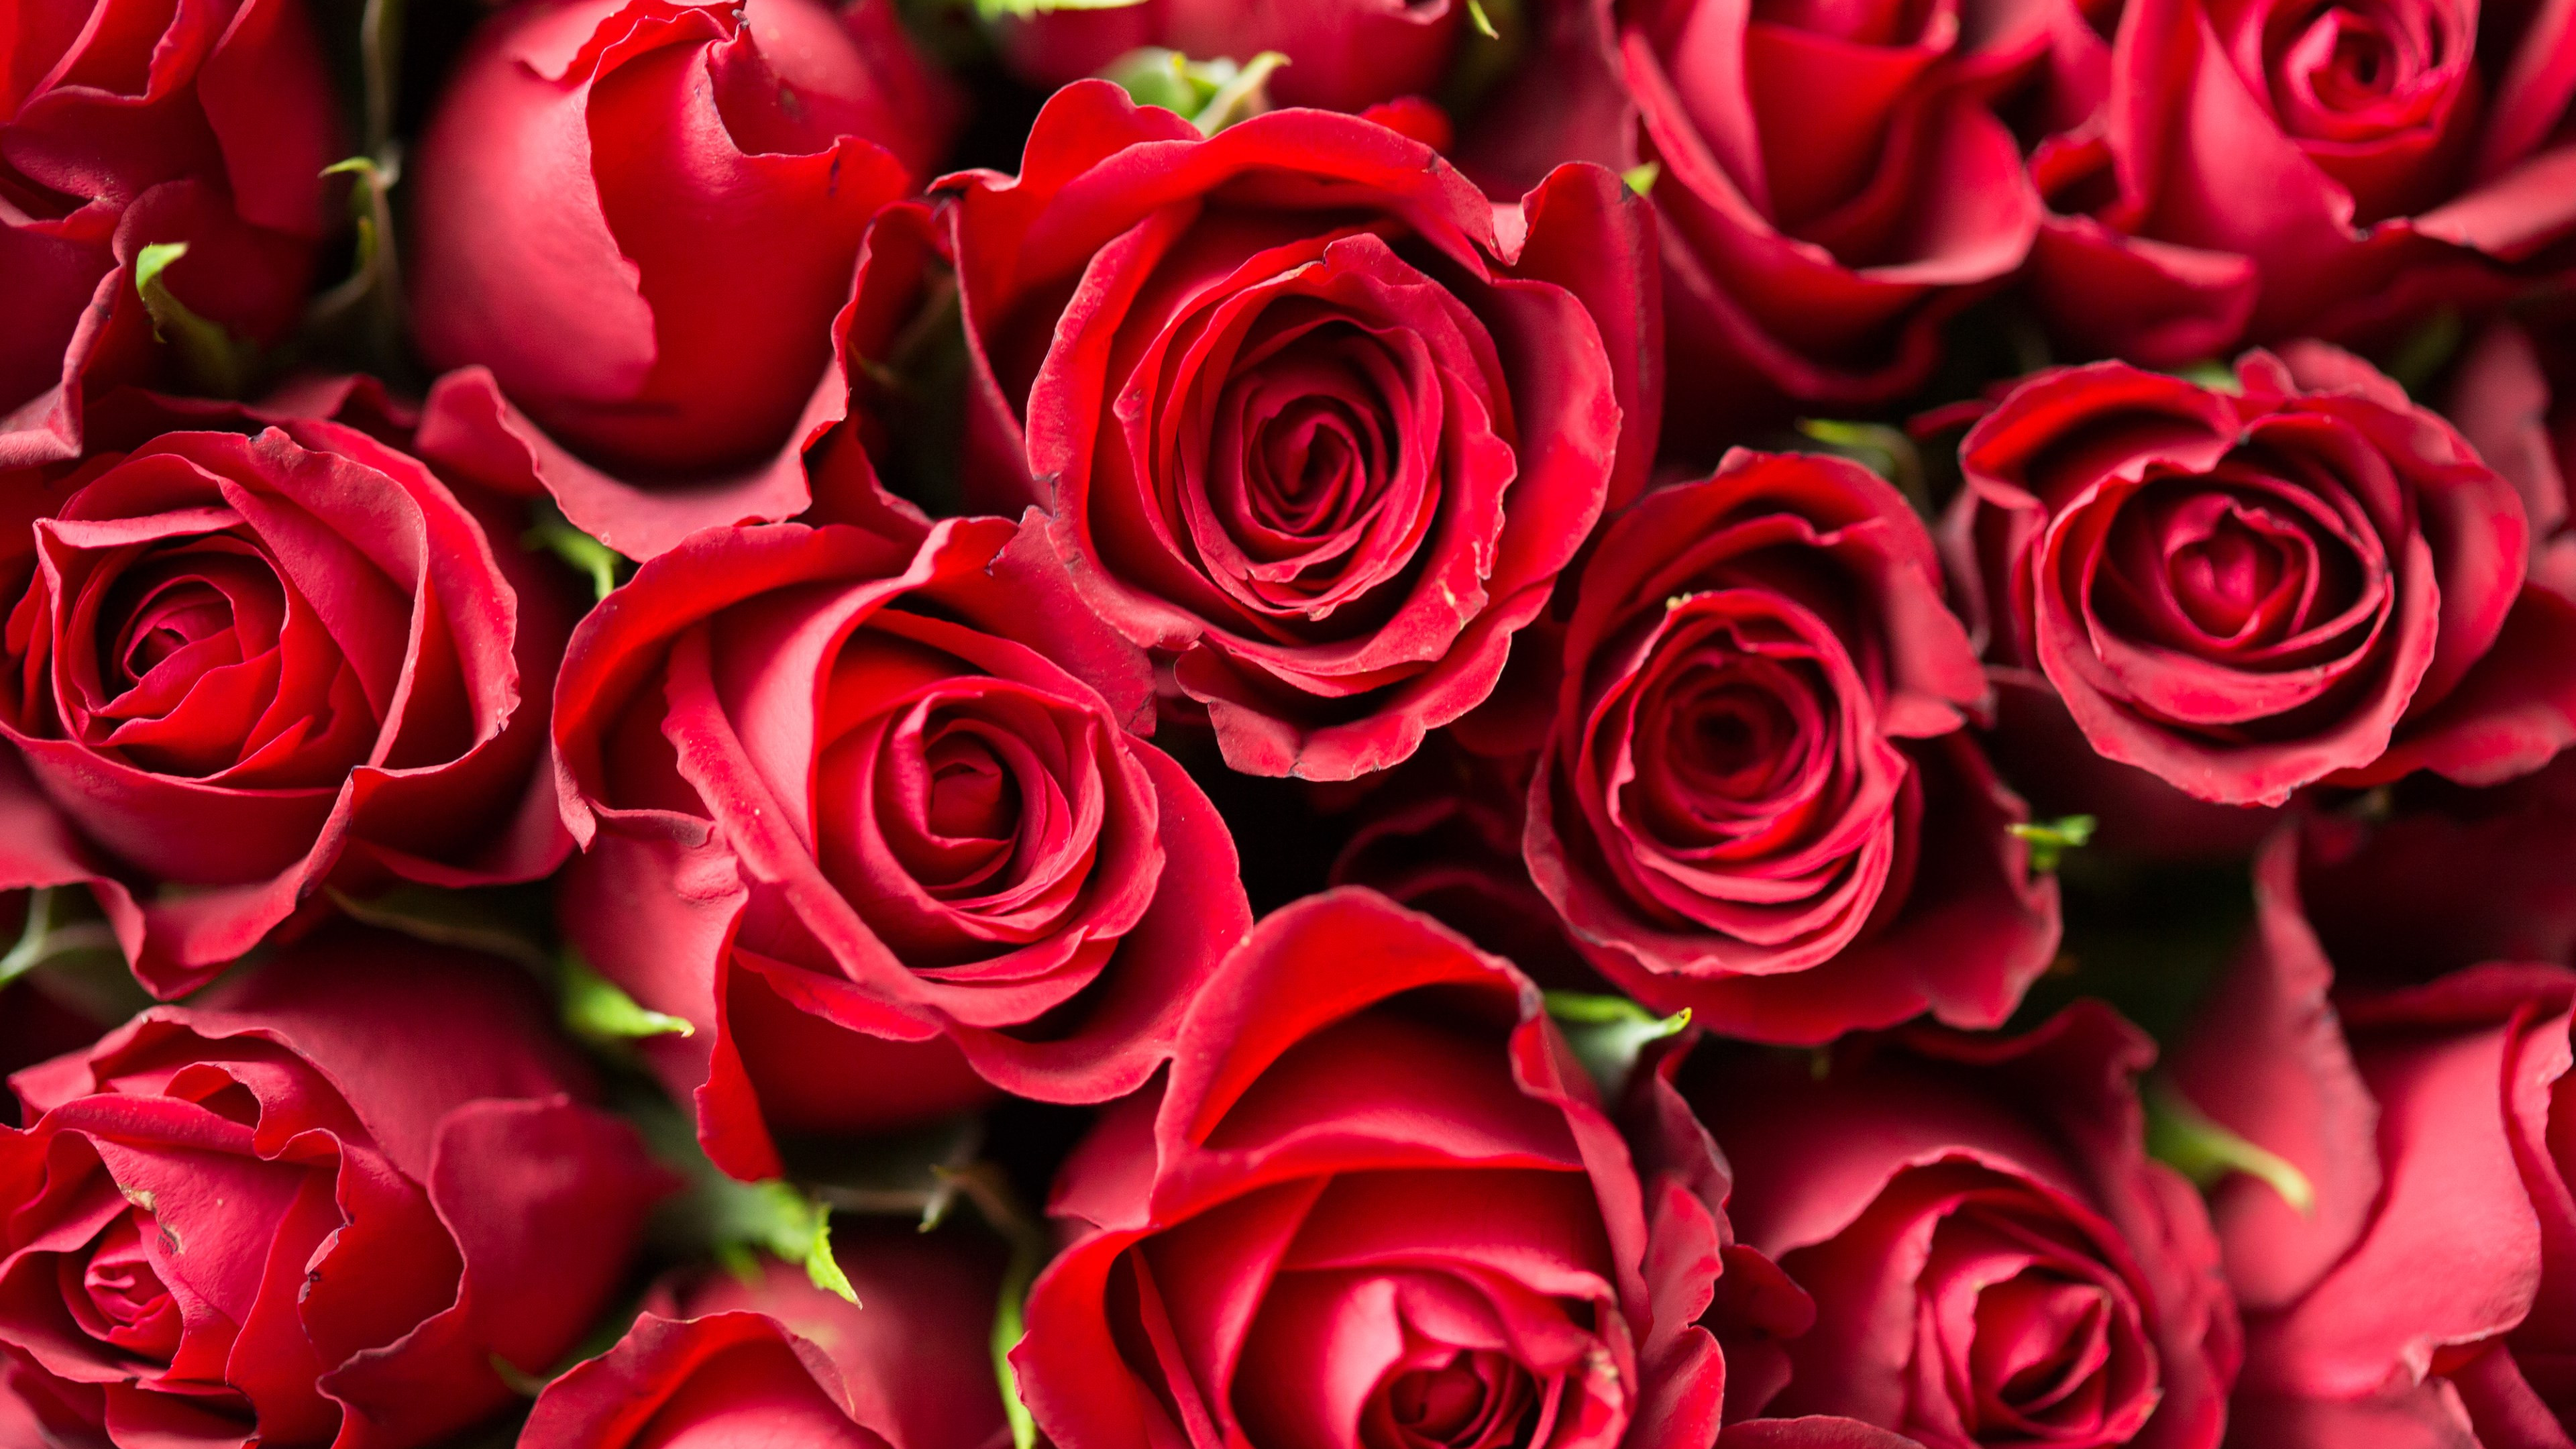 Lots of red roses wallpaper 3840x2160